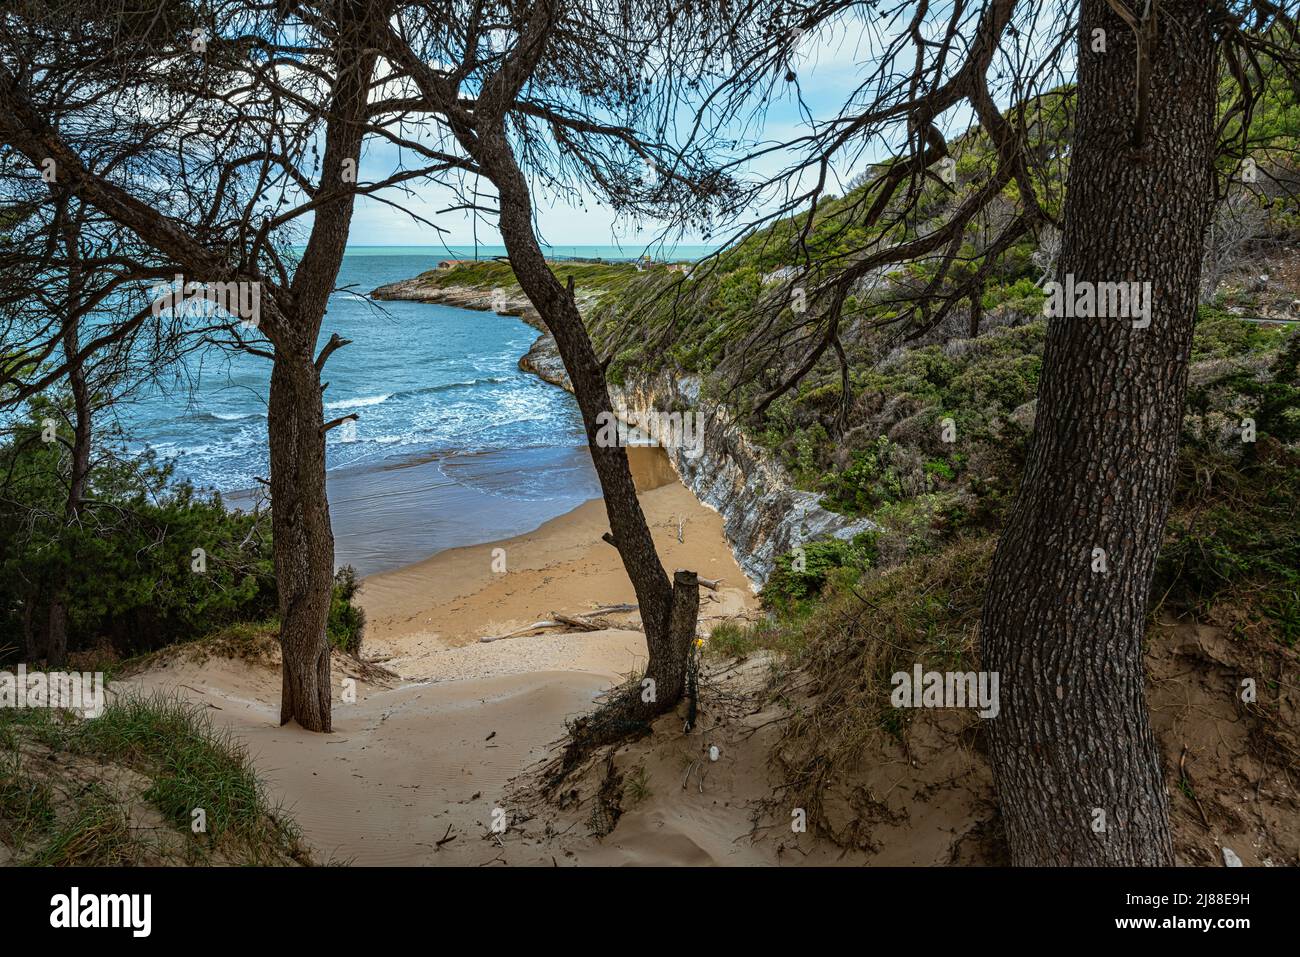 Top view of the sandy bay of Spiaggia Stretta in the Gargano promontory. Gargano, Puglia, Italy, Europe Stock Photo